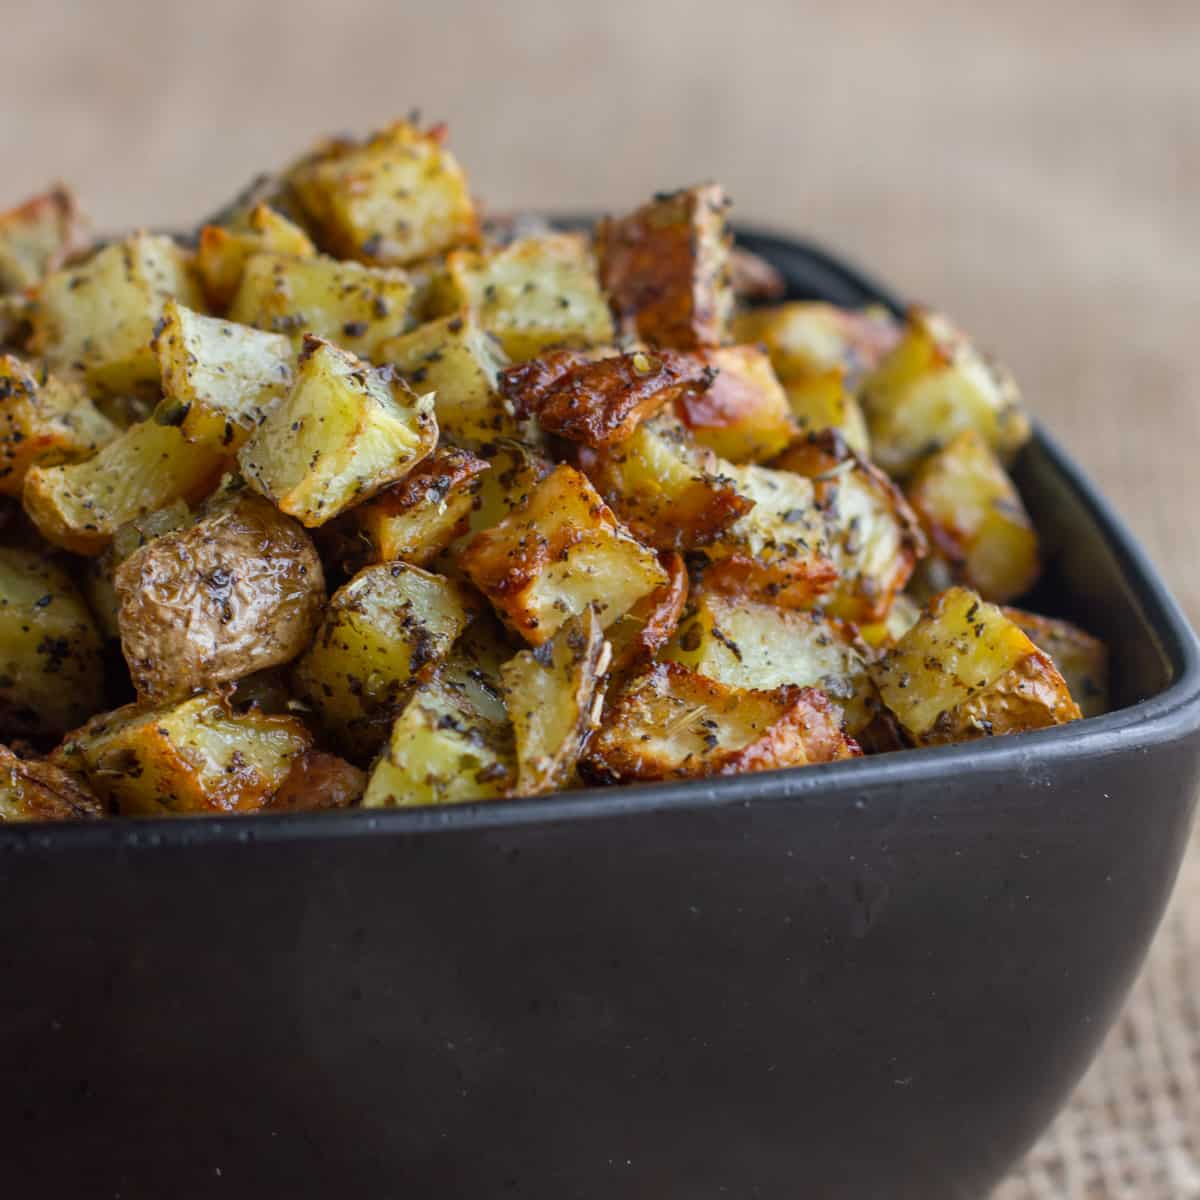 Side image of a black bowl filled with potatoes.